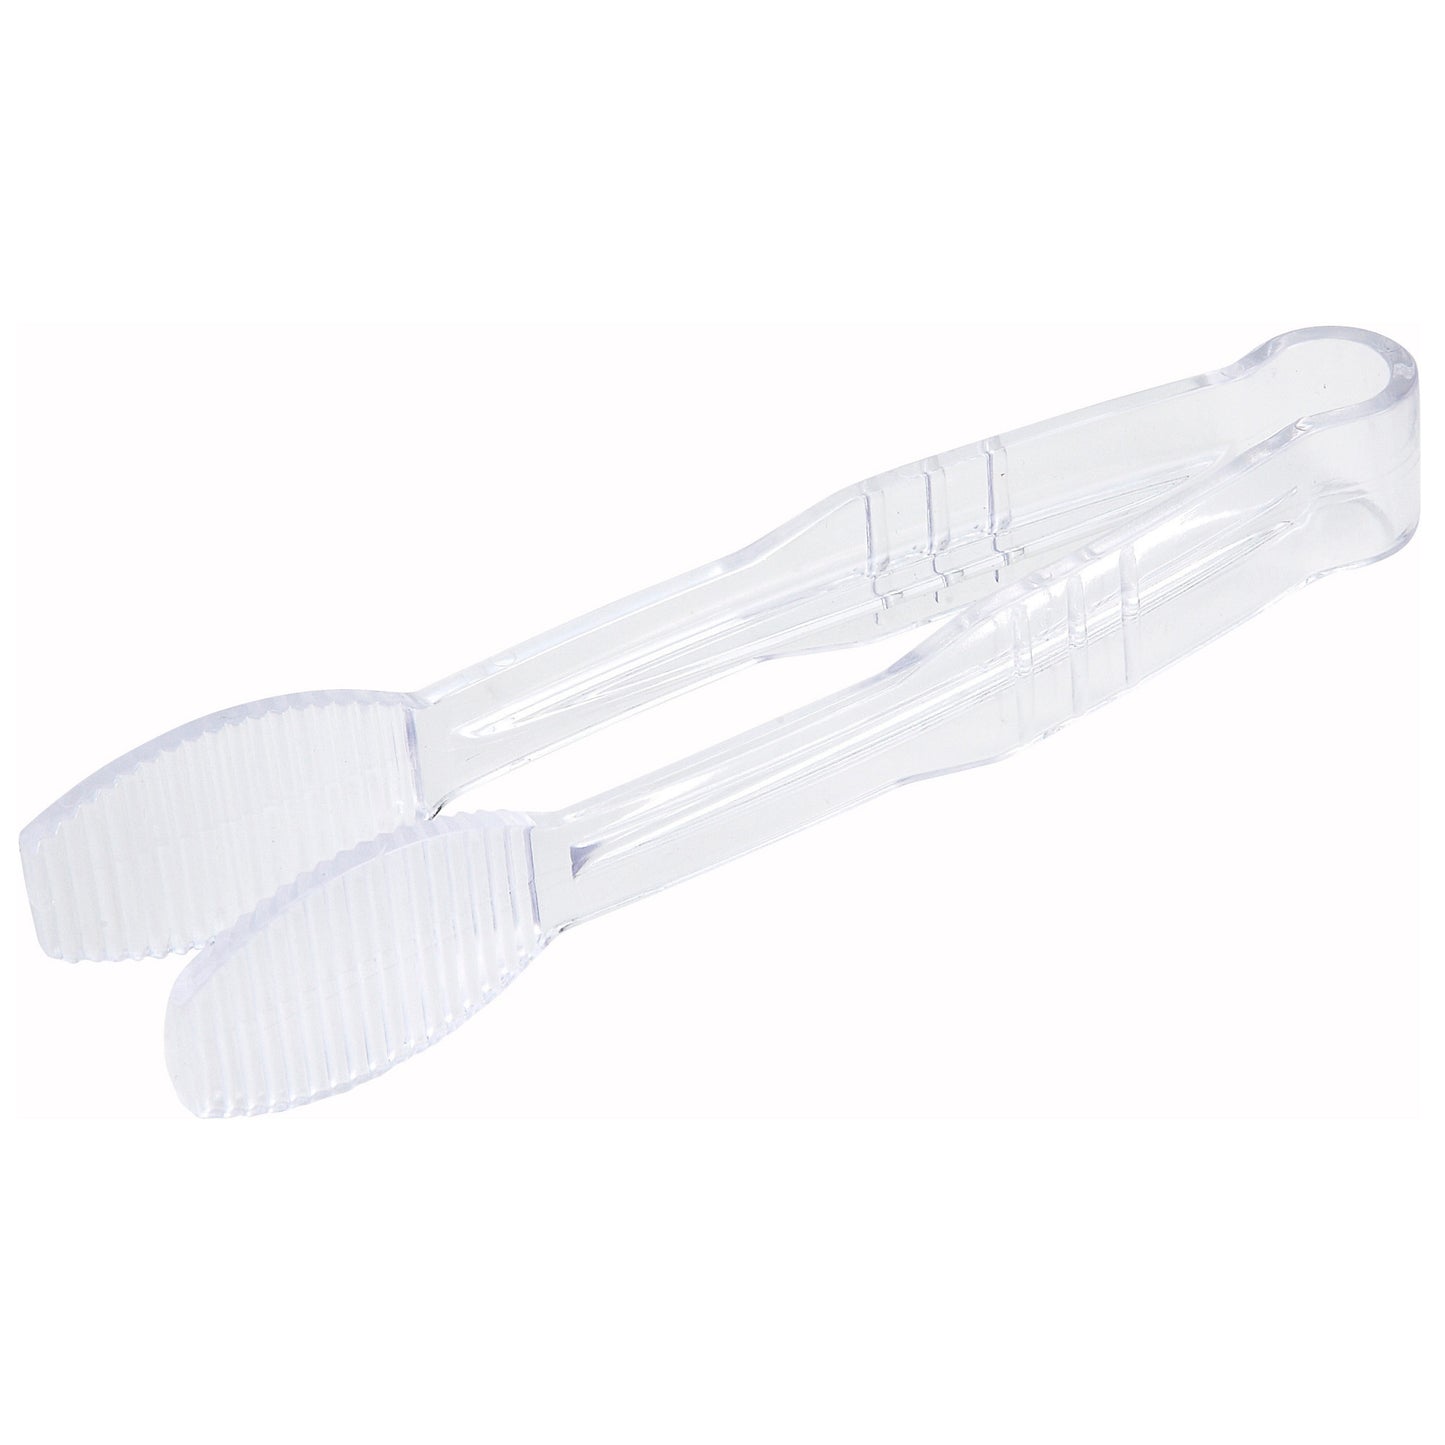 PUTF-6C - 6" Flat Tongs, Polycarbonate - Clear